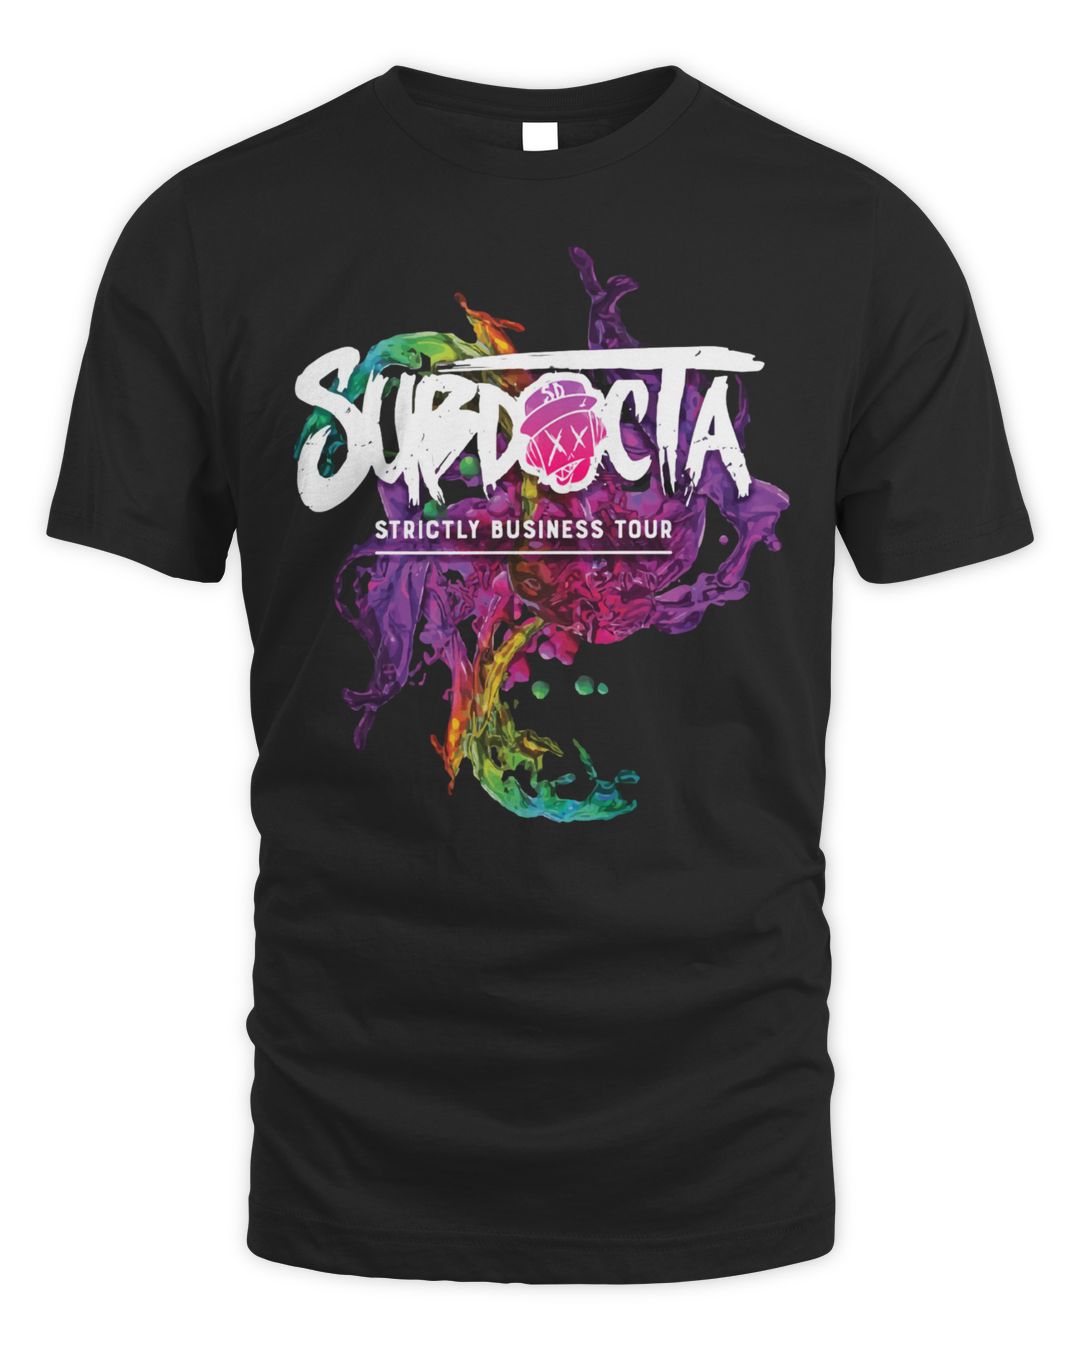 Subdocta Merch Strictly Business Tour Shirt